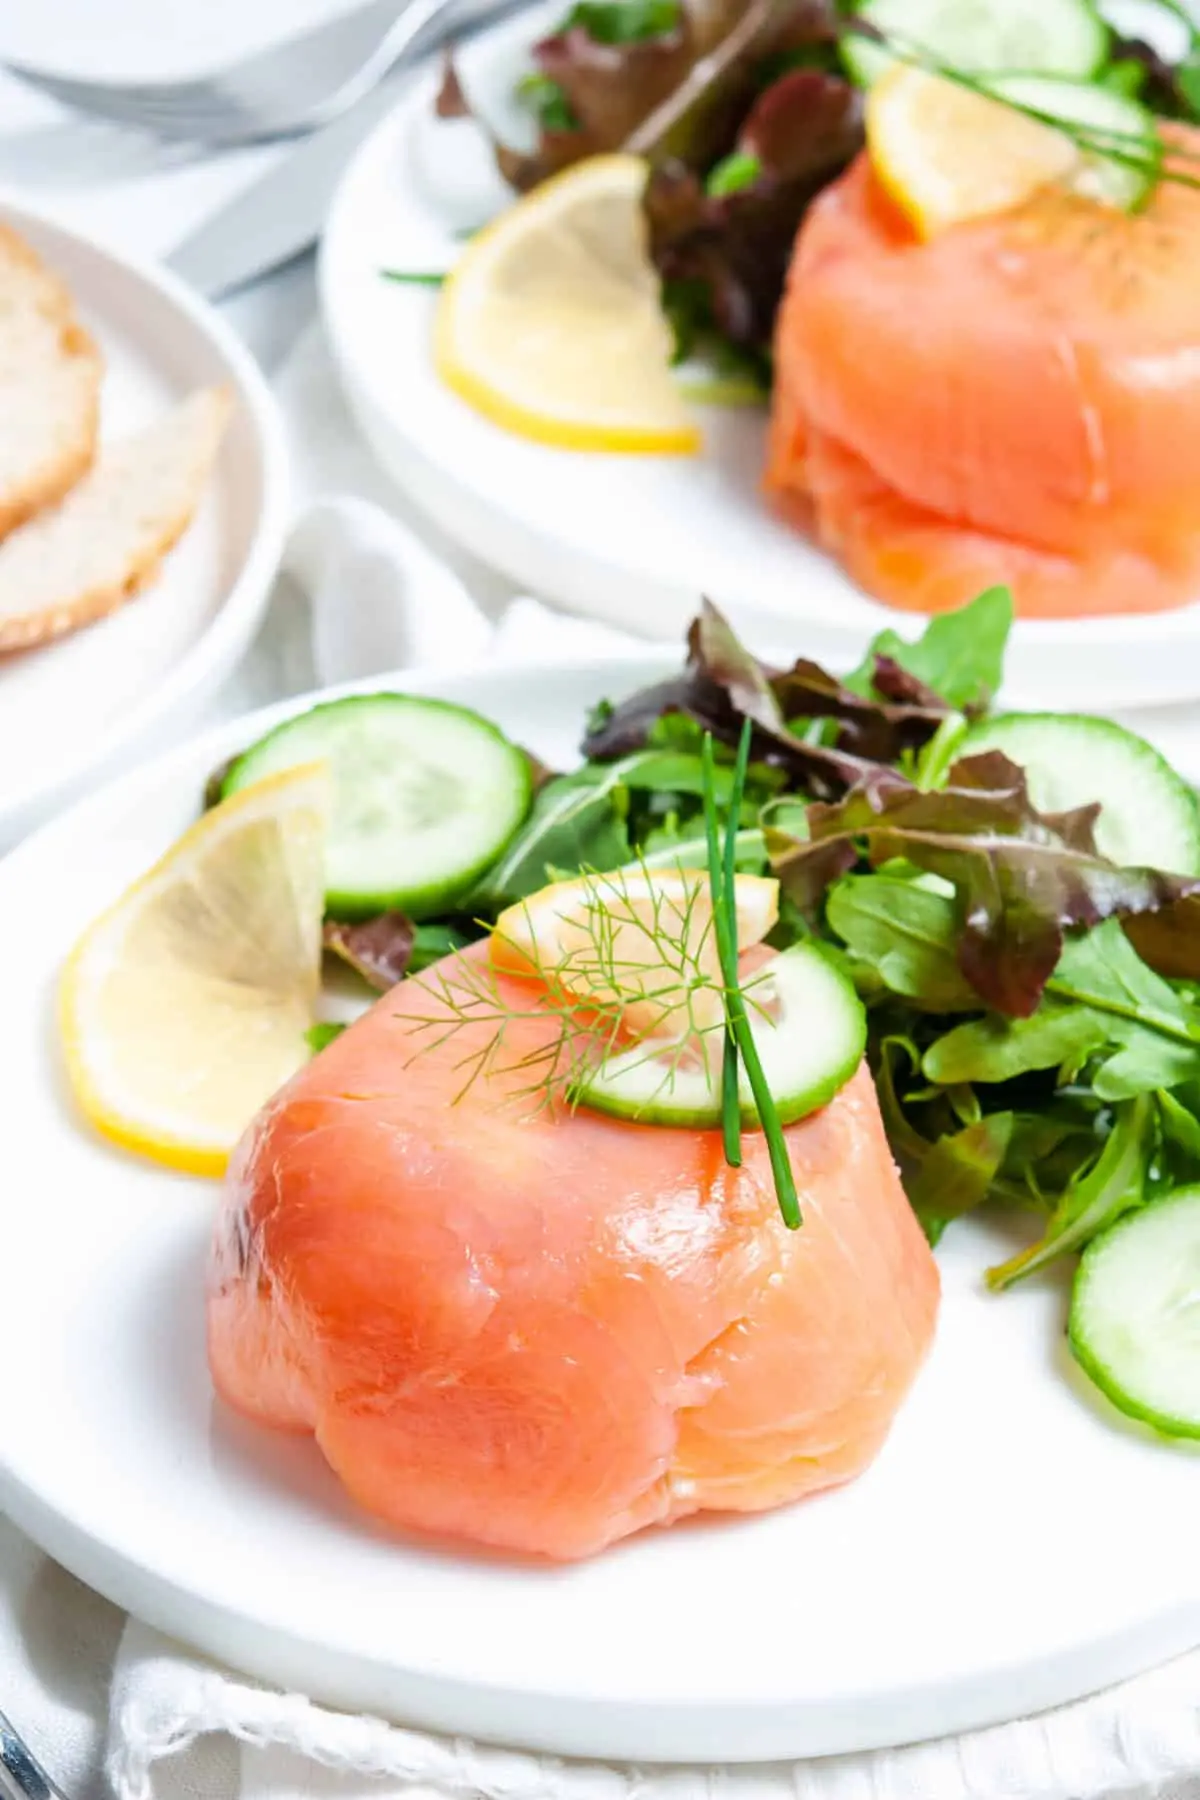 smoked salmon parcels - How do you package smoked salmon